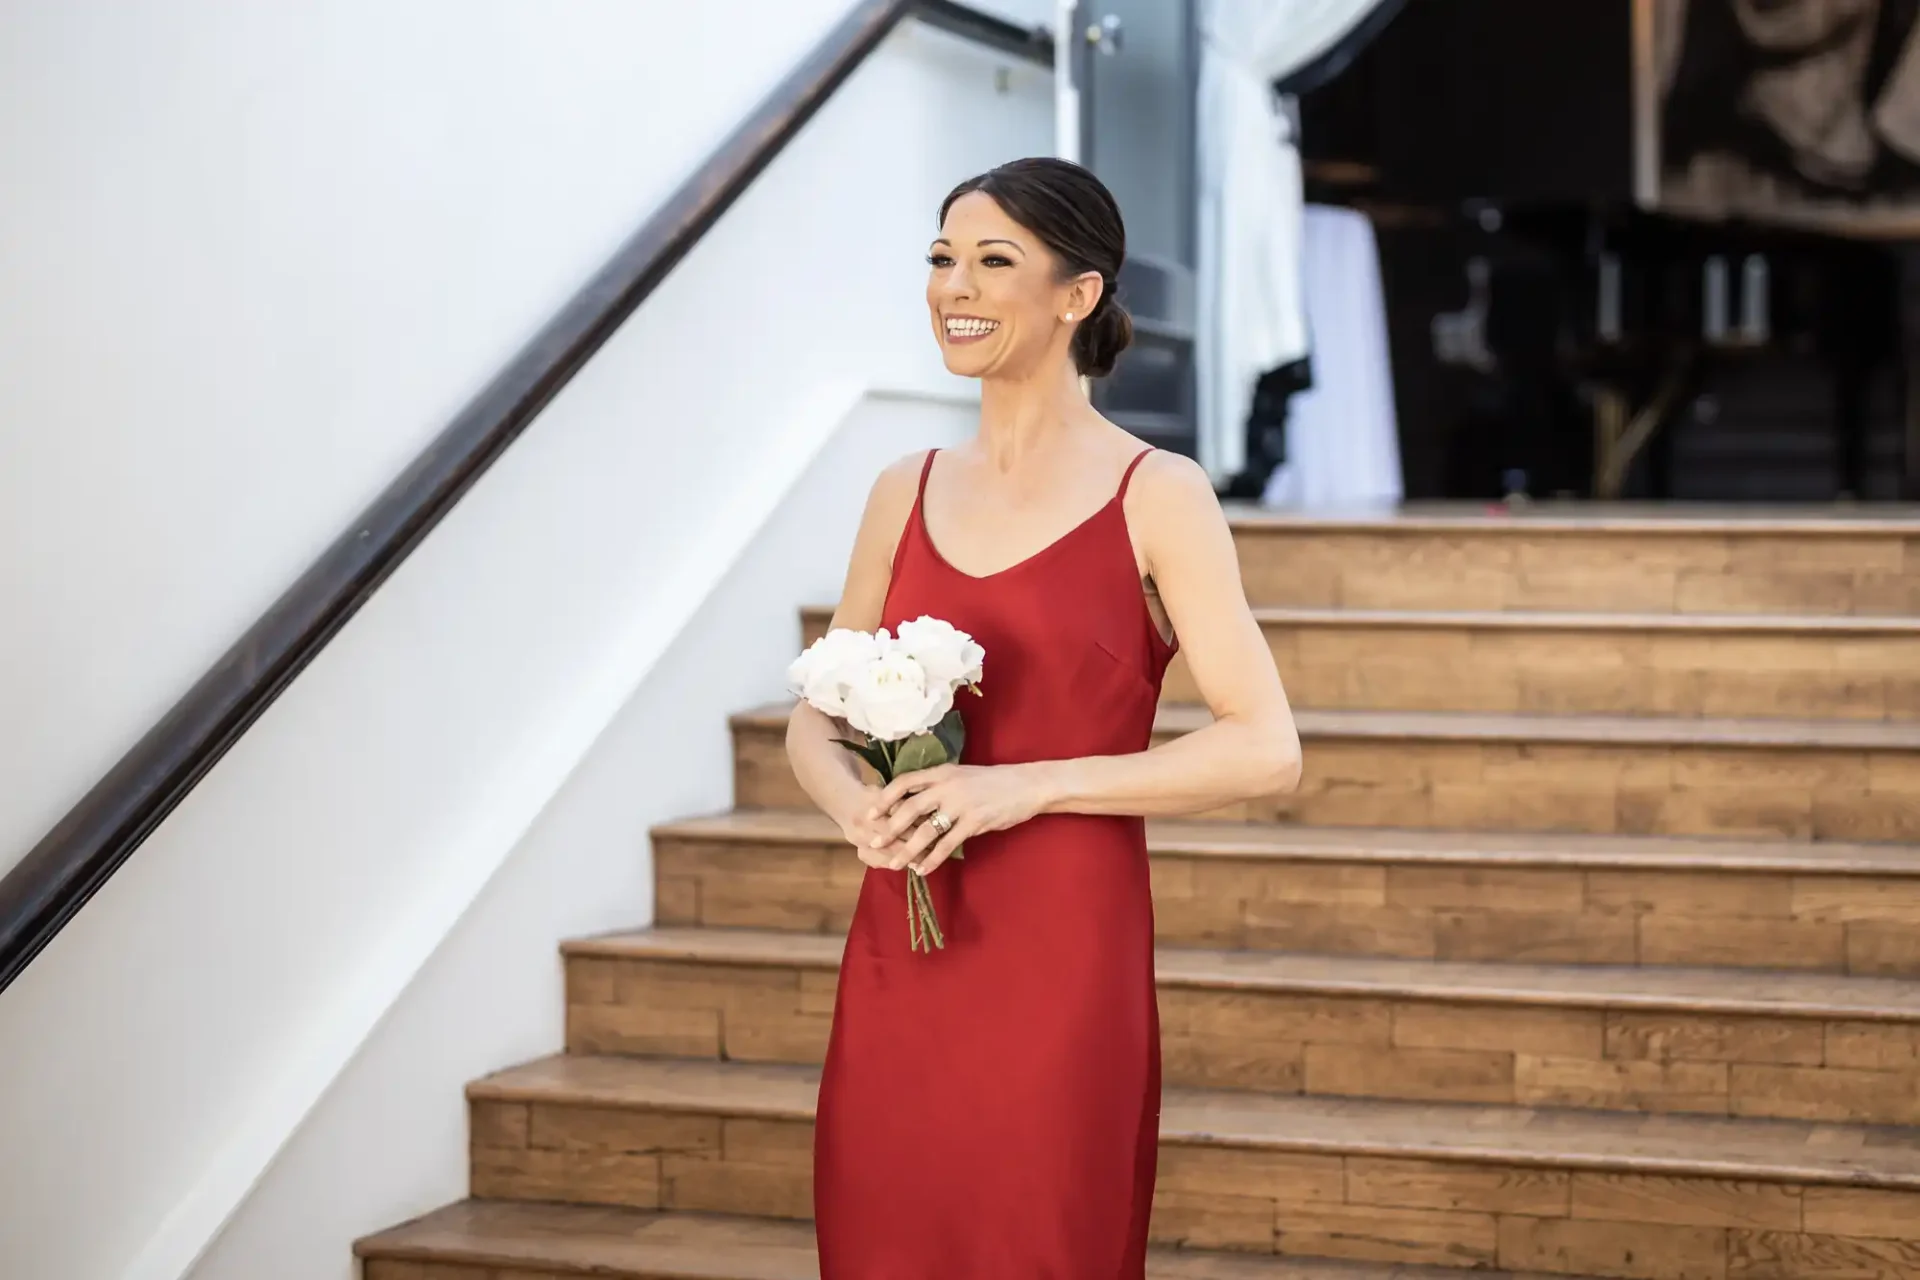 A woman in a red dress smiles while holding a bouquet of white flowers, standing on a staircase.